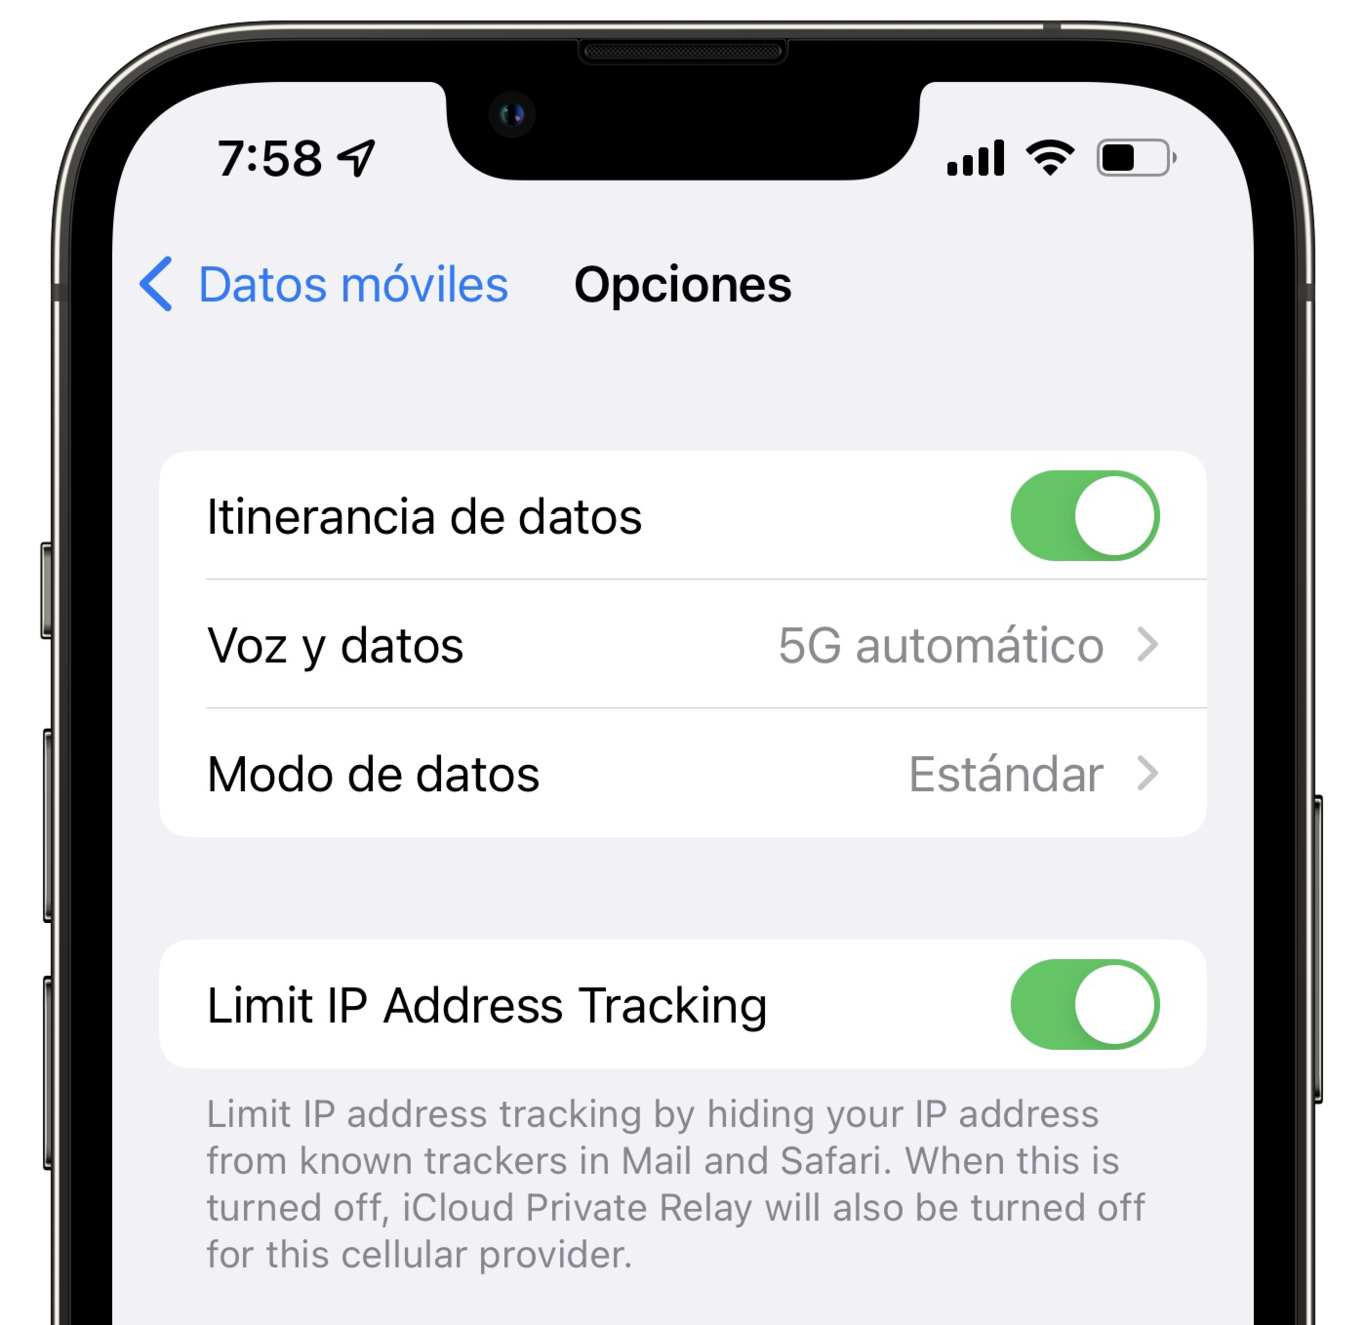 ICloud Private Relay